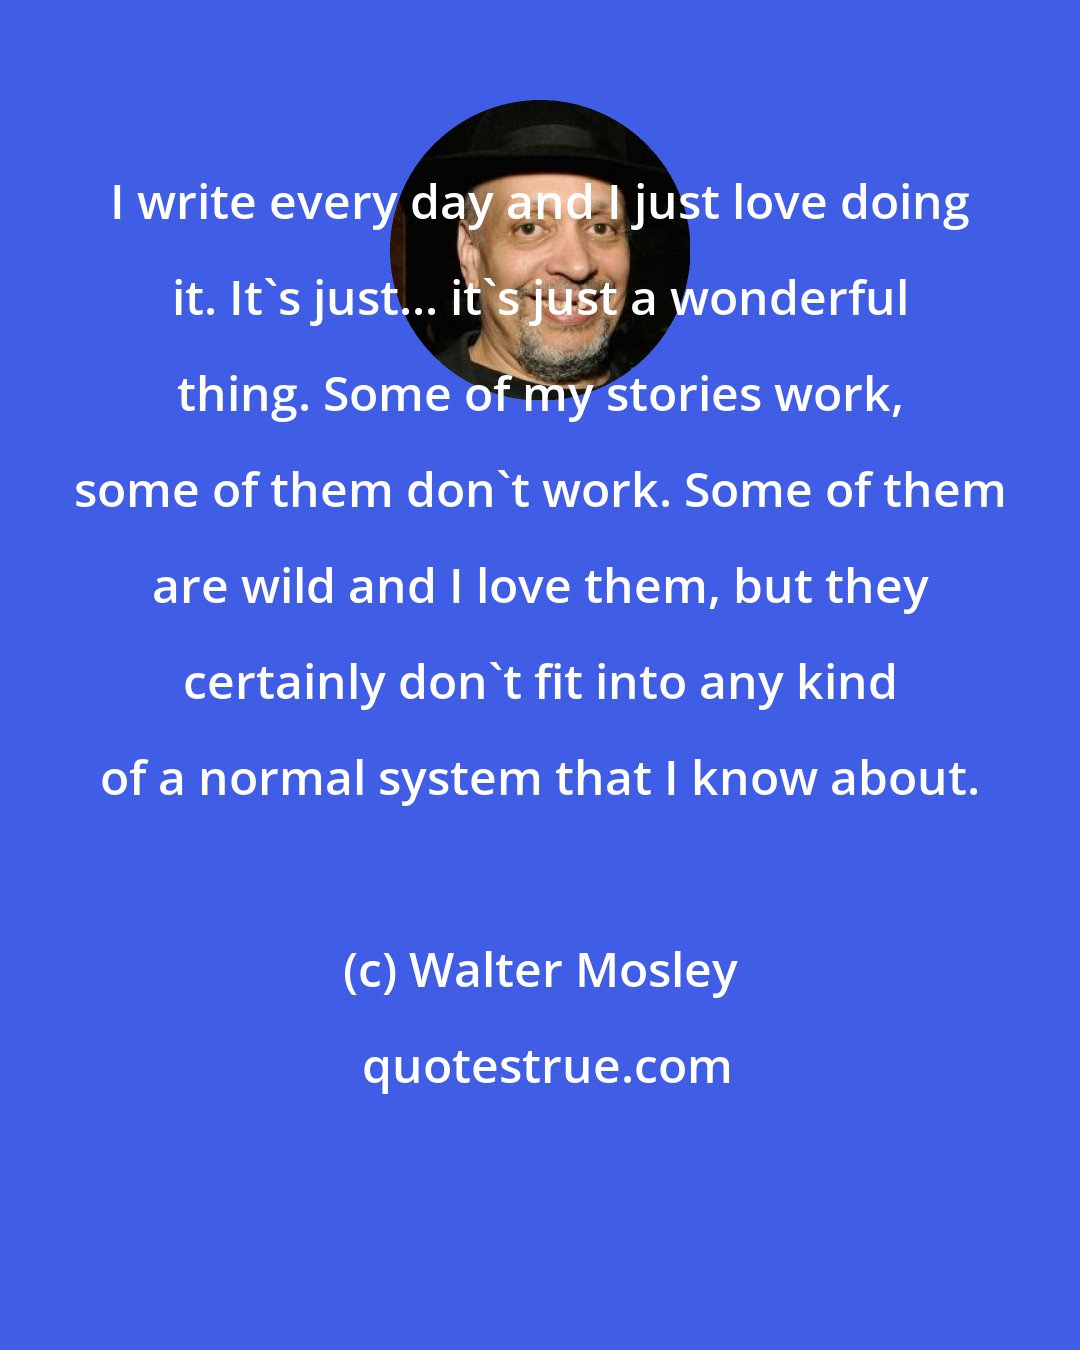 Walter Mosley: I write every day and I just love doing it. It's just... it's just a wonderful thing. Some of my stories work, some of them don't work. Some of them are wild and I love them, but they certainly don't fit into any kind of a normal system that I know about.